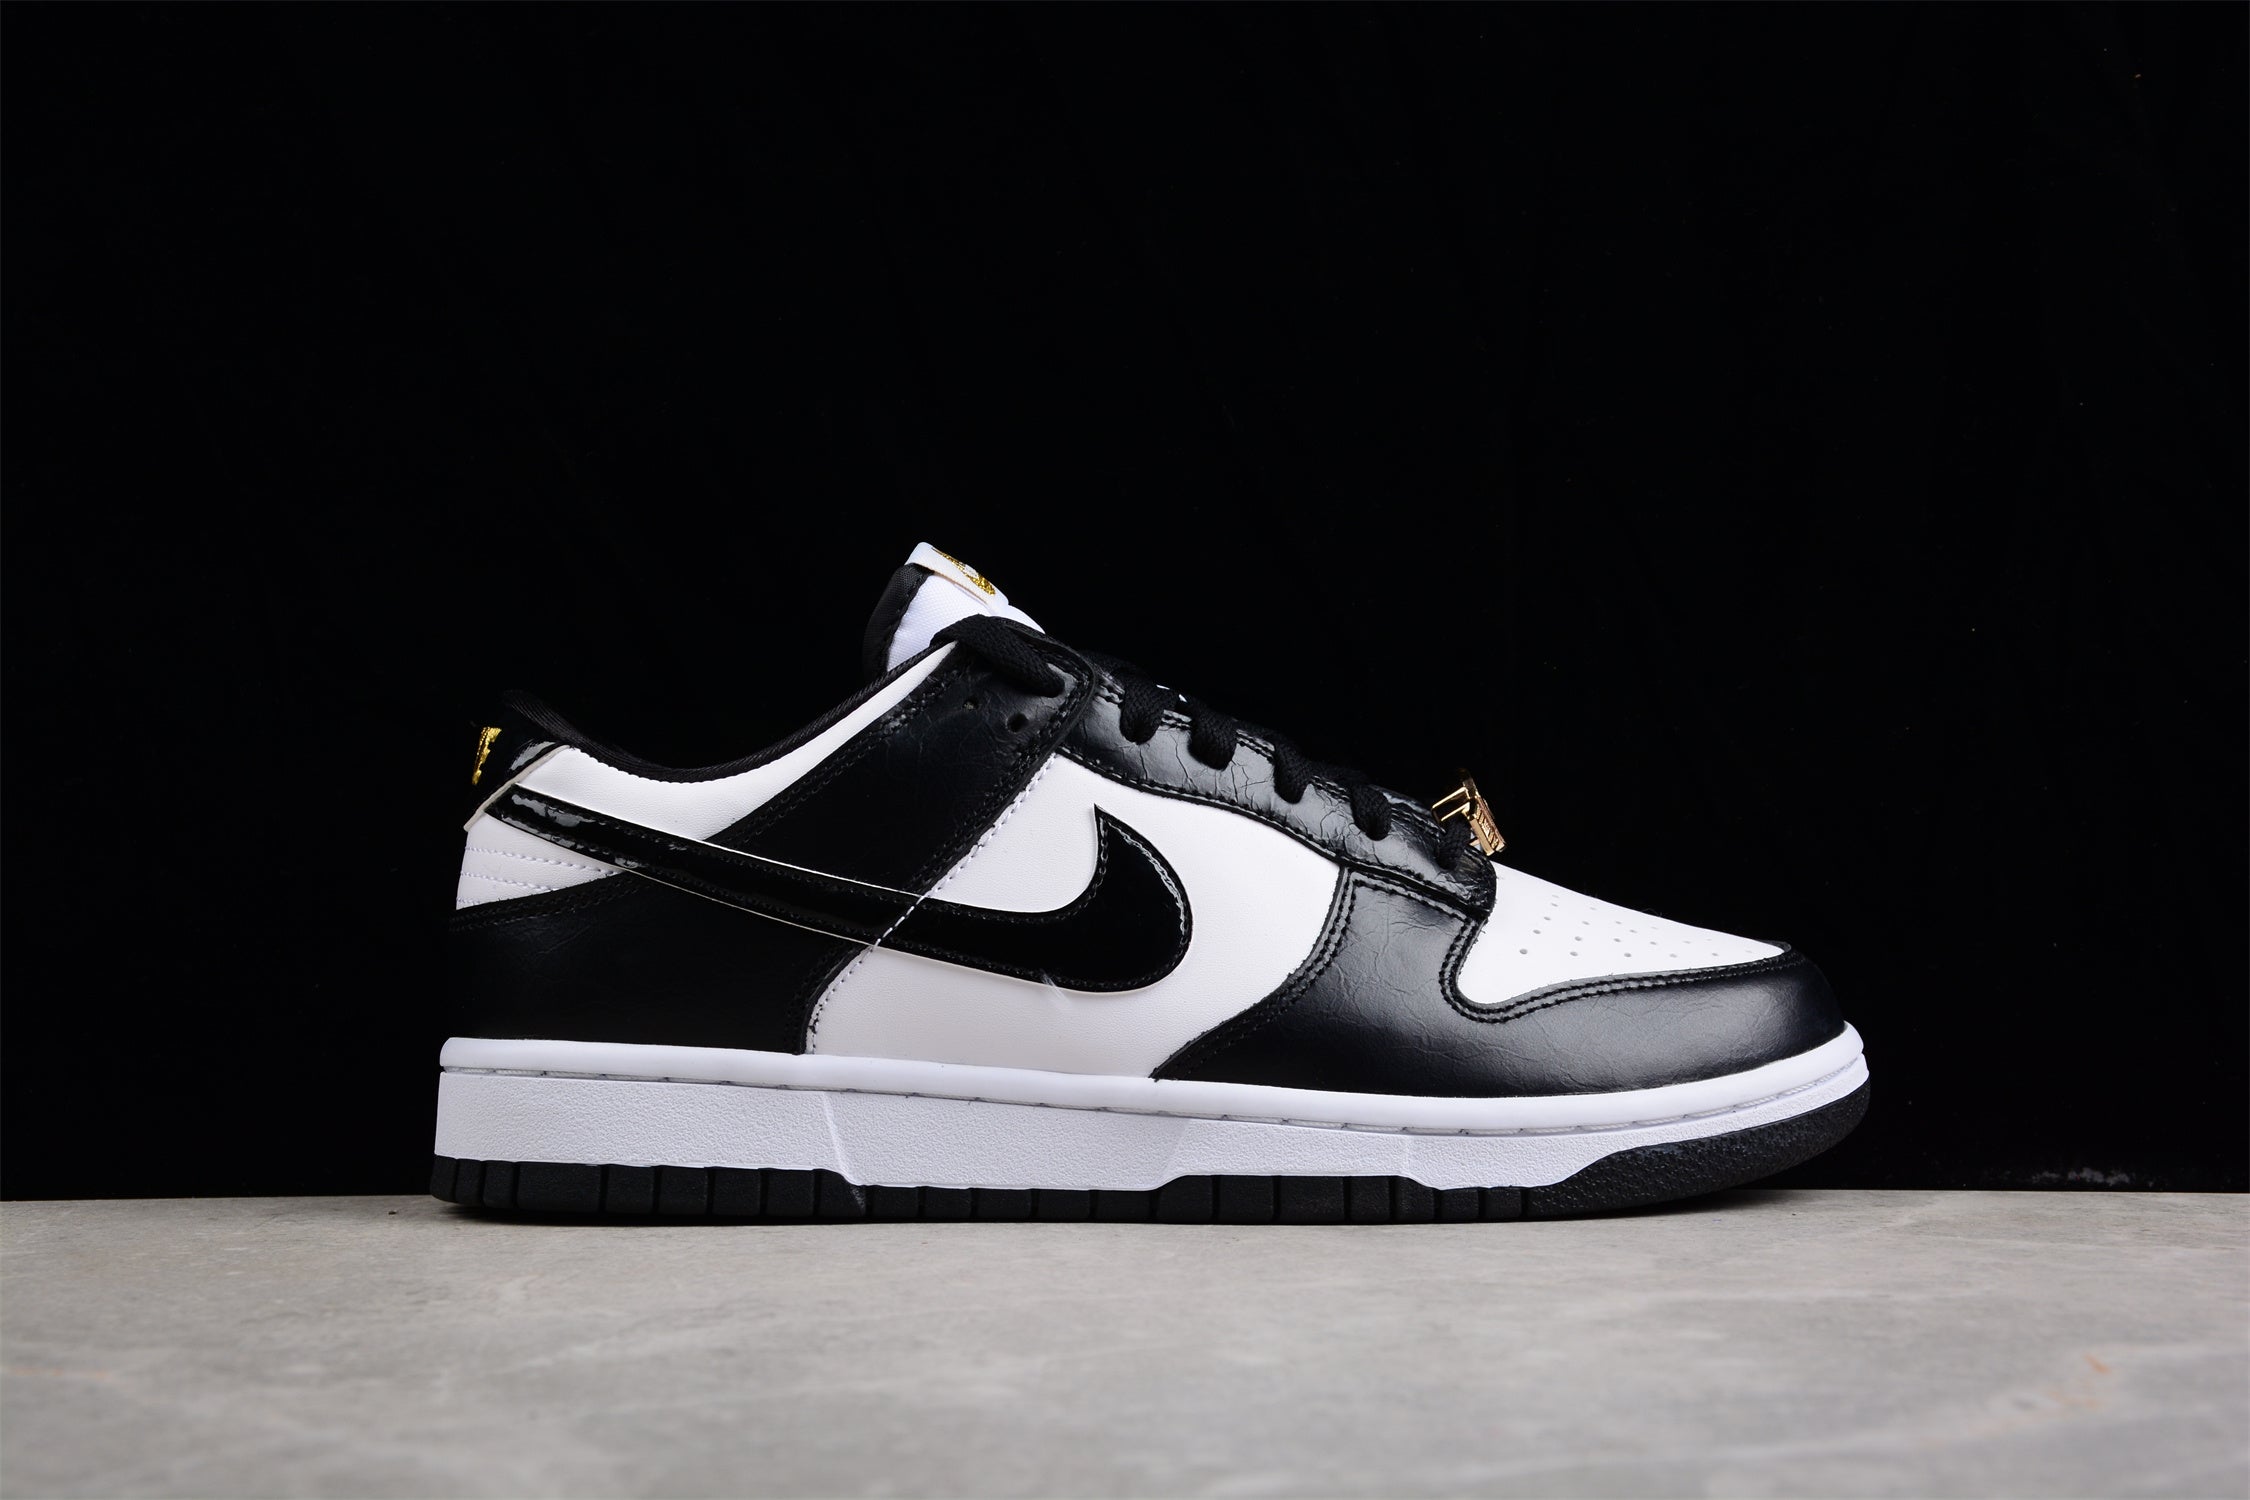 NikeMens Dunk Low - Would Champ